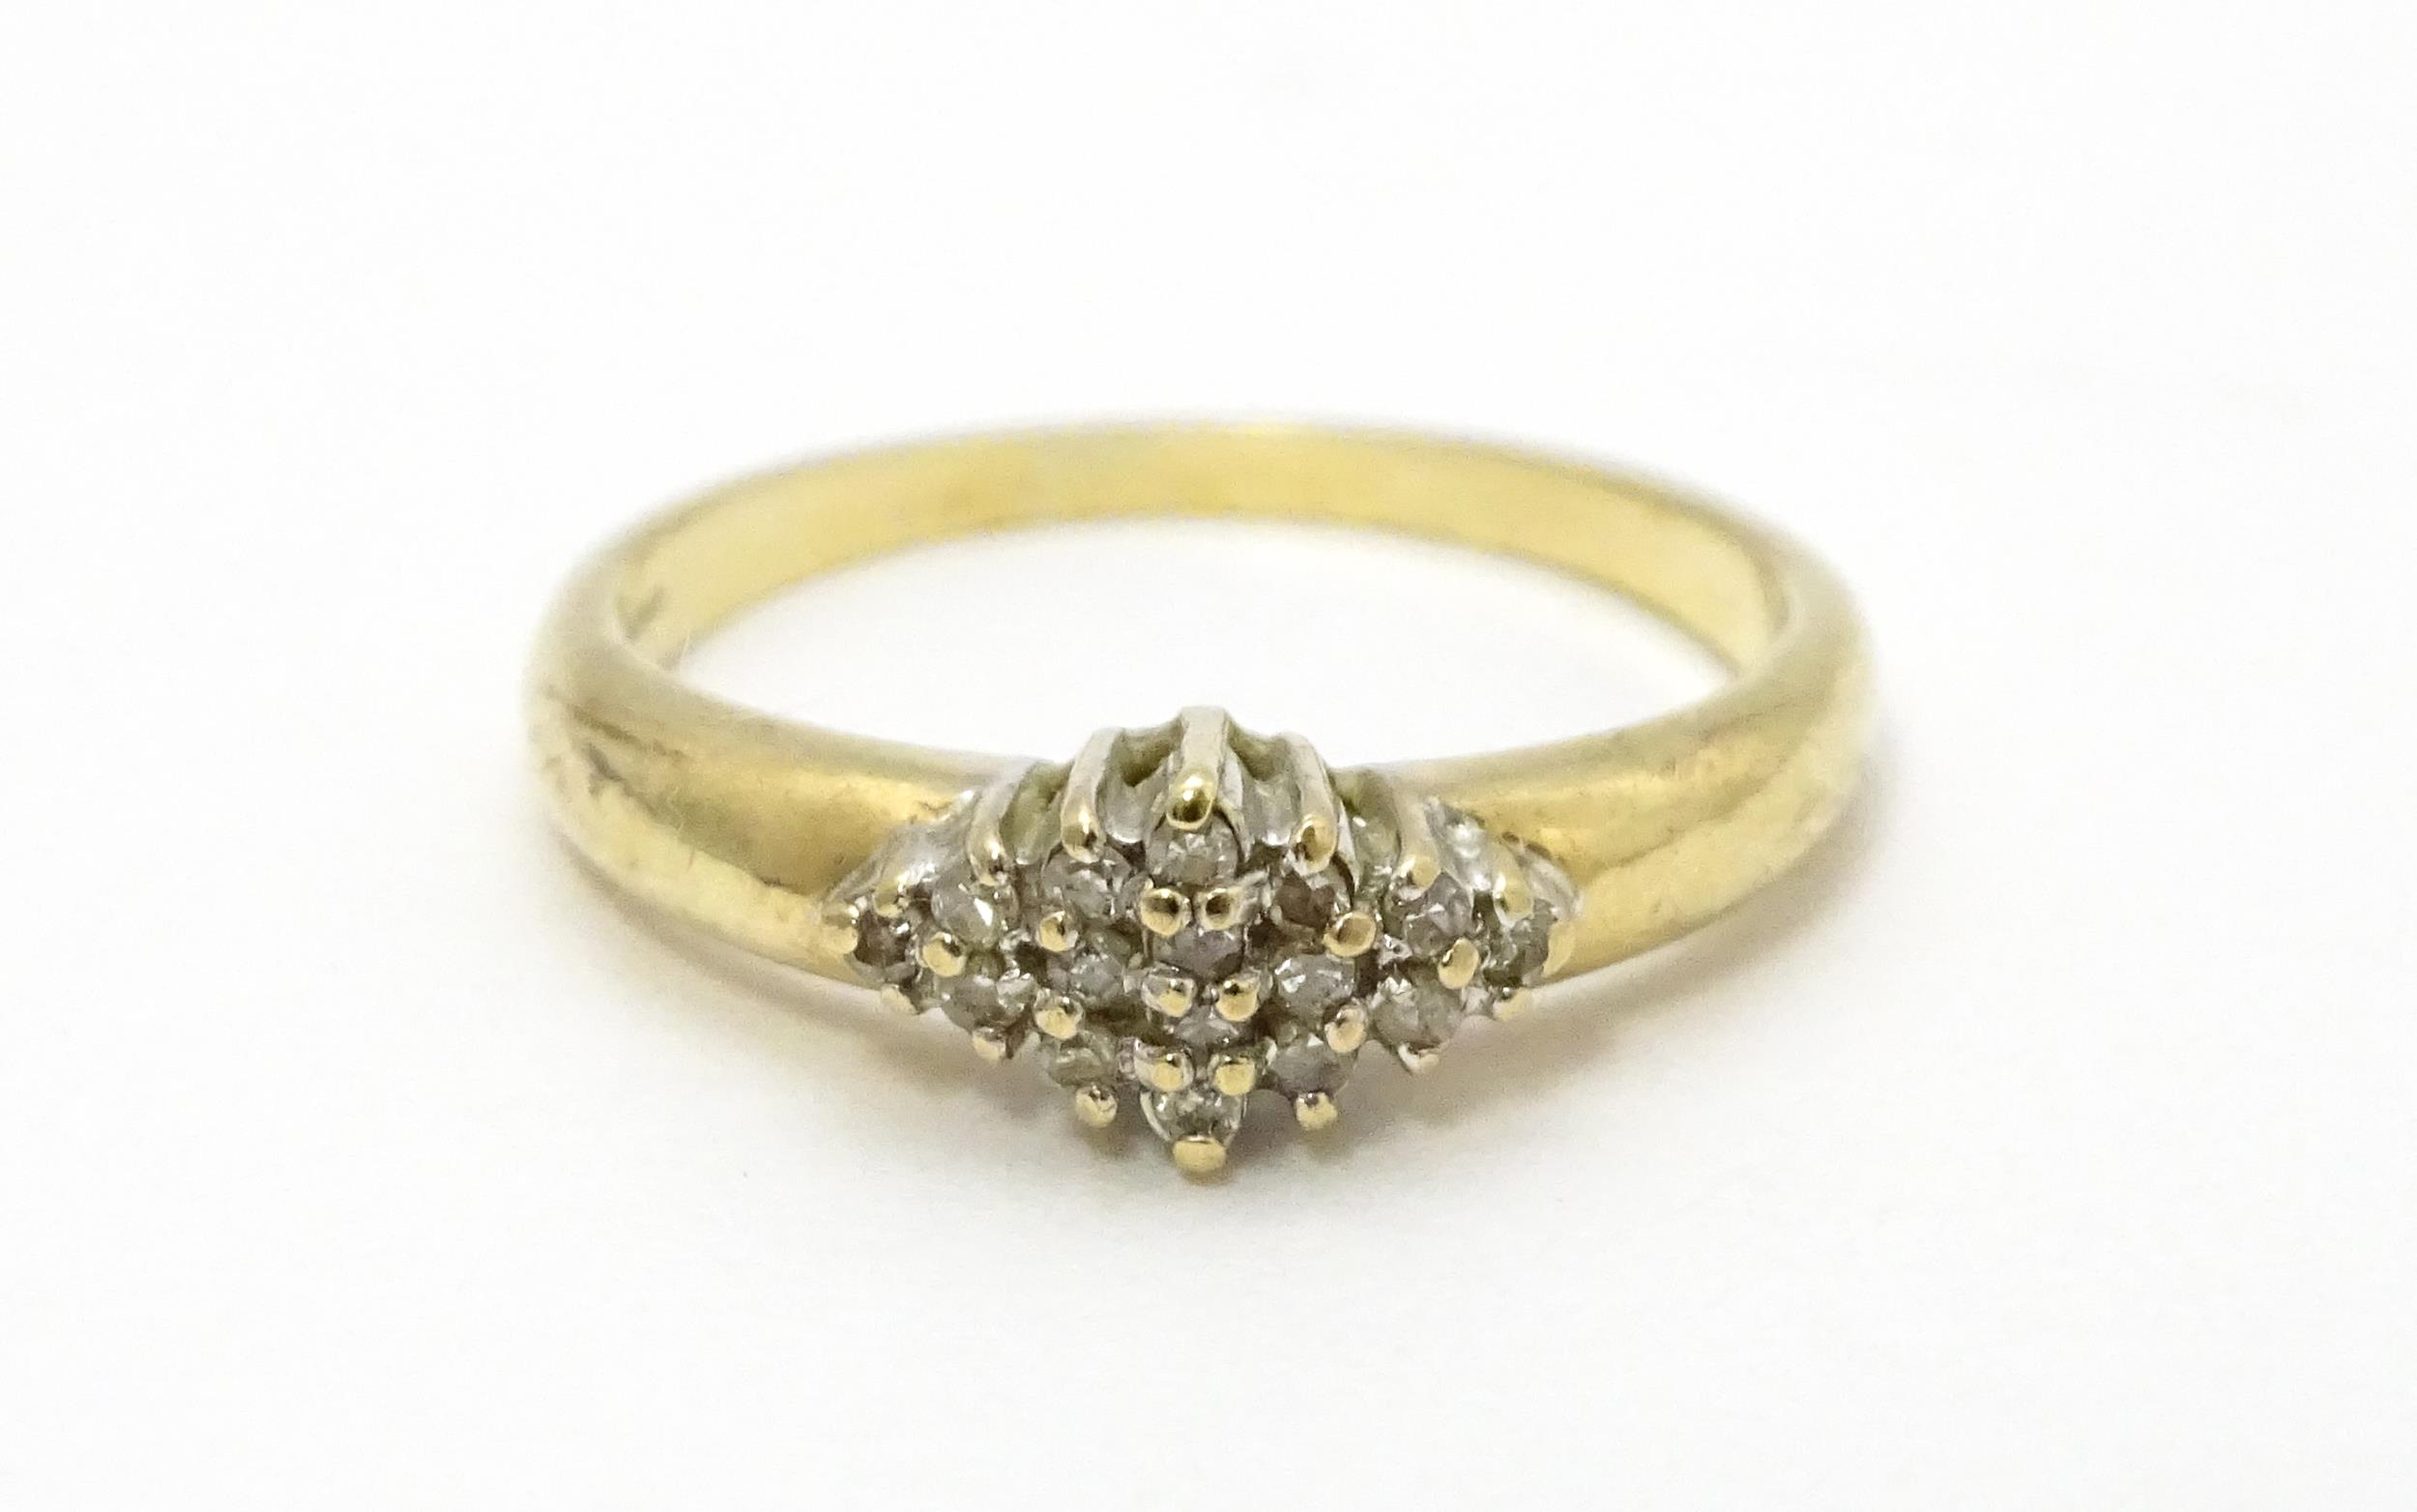 A 9ct gold ring set with diamond cluster. Ring size approx. K 1/2 Please Note - we do not make